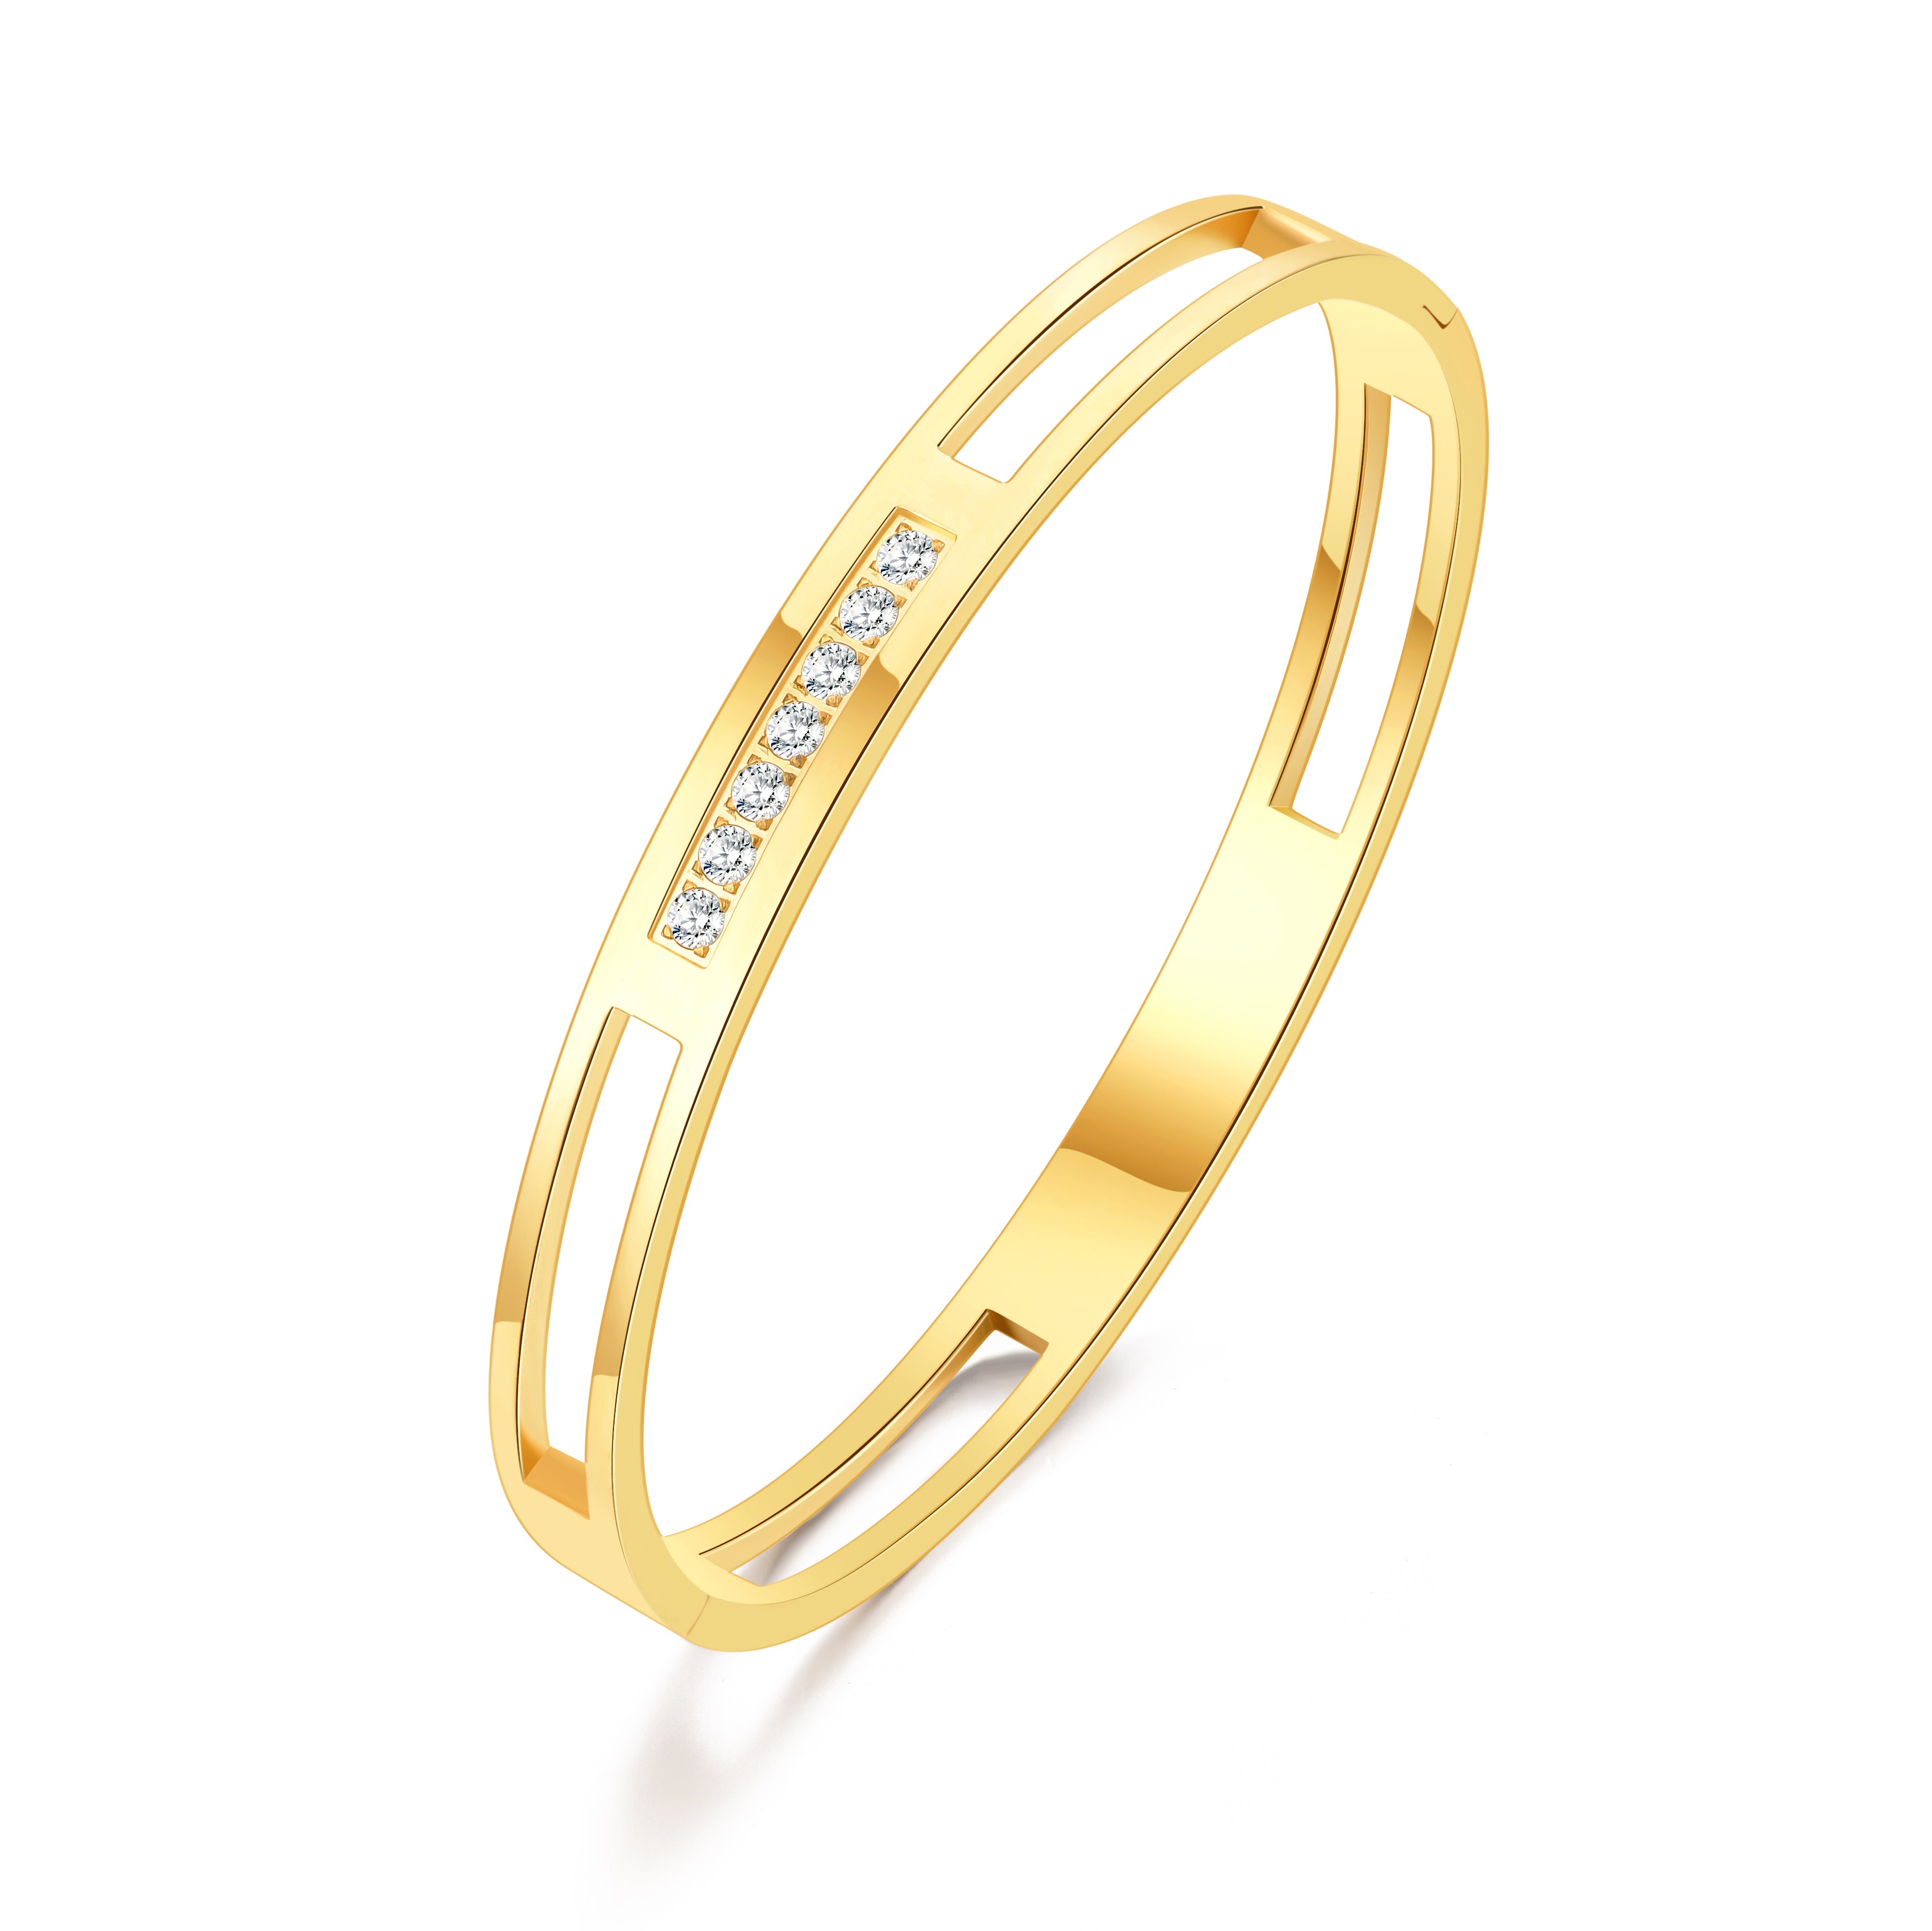 Gold Plated Stainless Steel Channel Bangle Created with Zircondia® Crystals by Philip Jones Jewellery